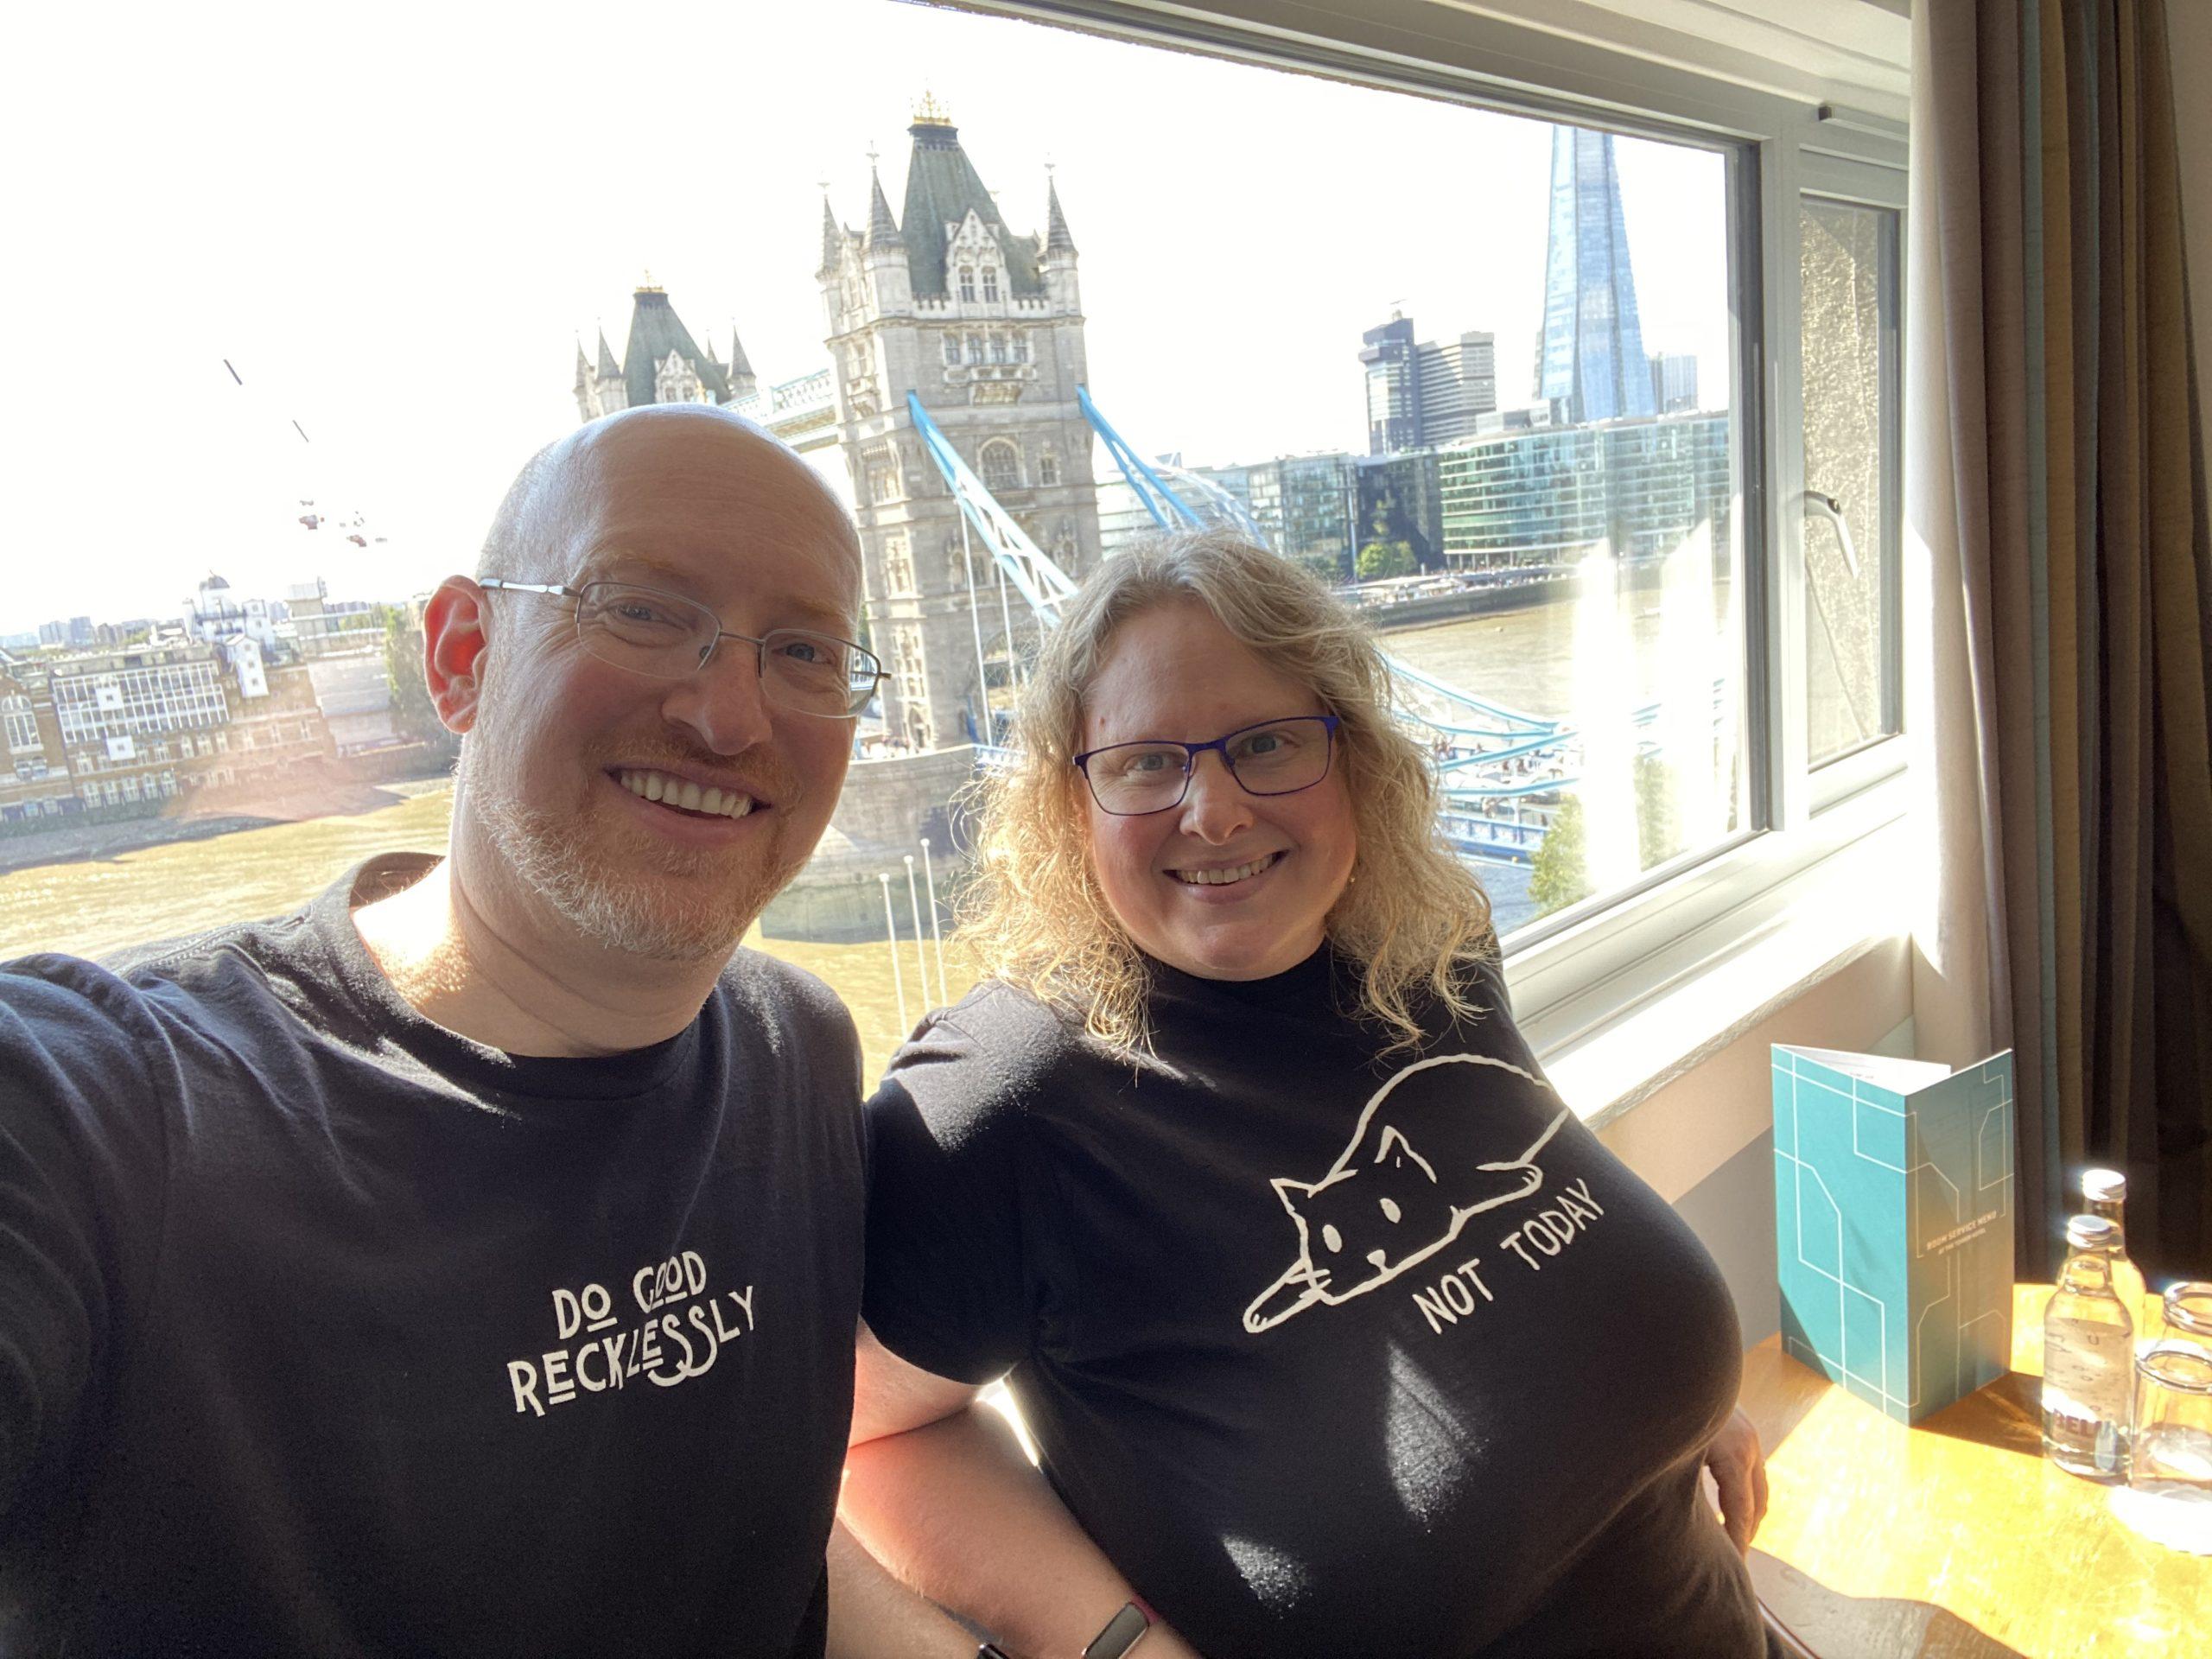 My wife and I in front of the window of our hotel room in London. Behind us is a gorgeous view of Tower Bridge.